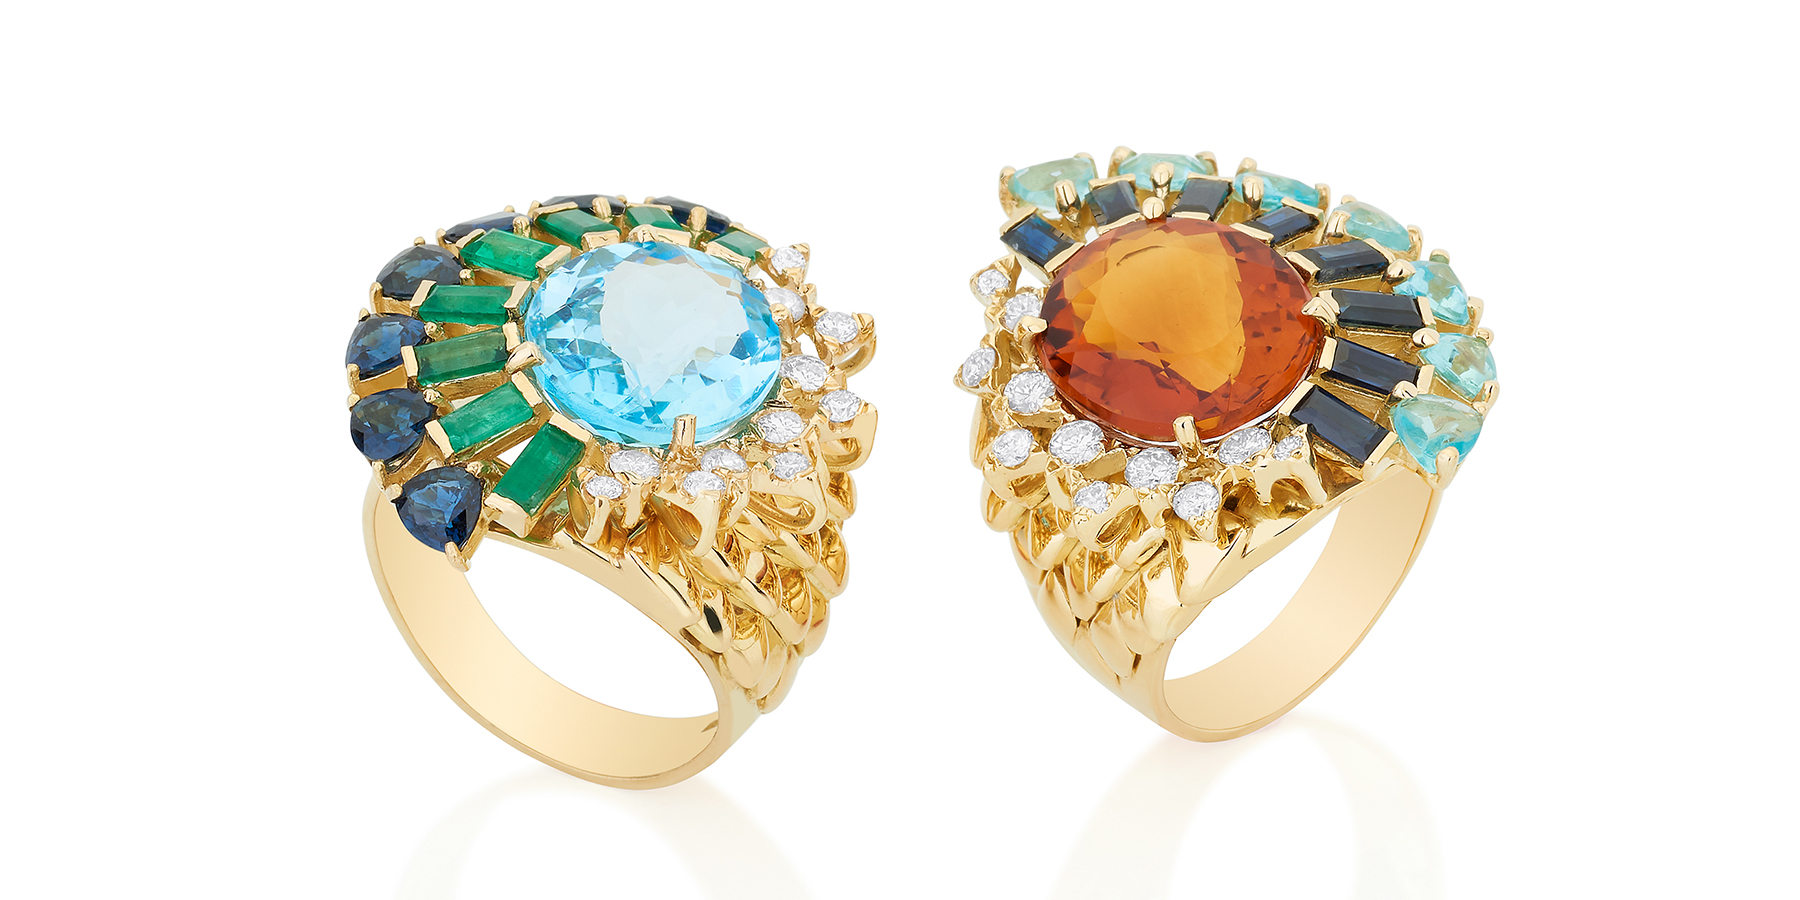 Carol Kauffmann ‘Magic Scales’ rings with (left) topaz, emeralds, sapphires and diamonds, and (right) citrine, sapphires, apatite and diamonds, both in 18k yellow gold